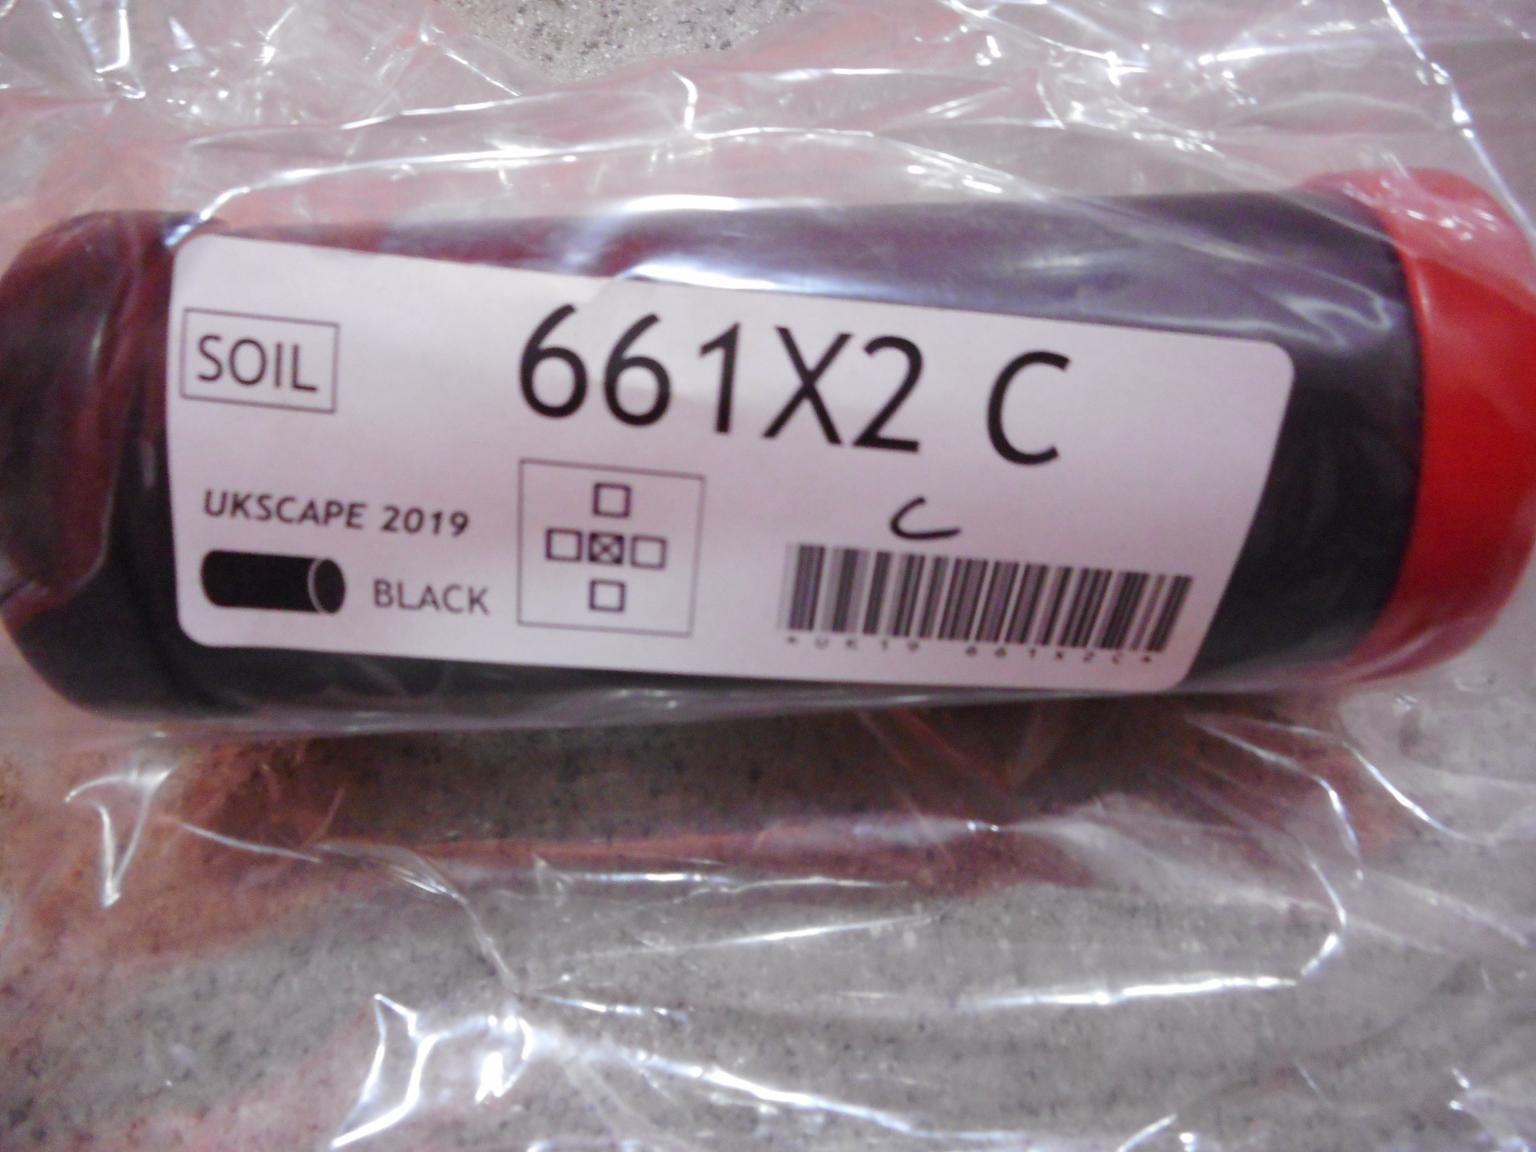 A barcoded soil sample